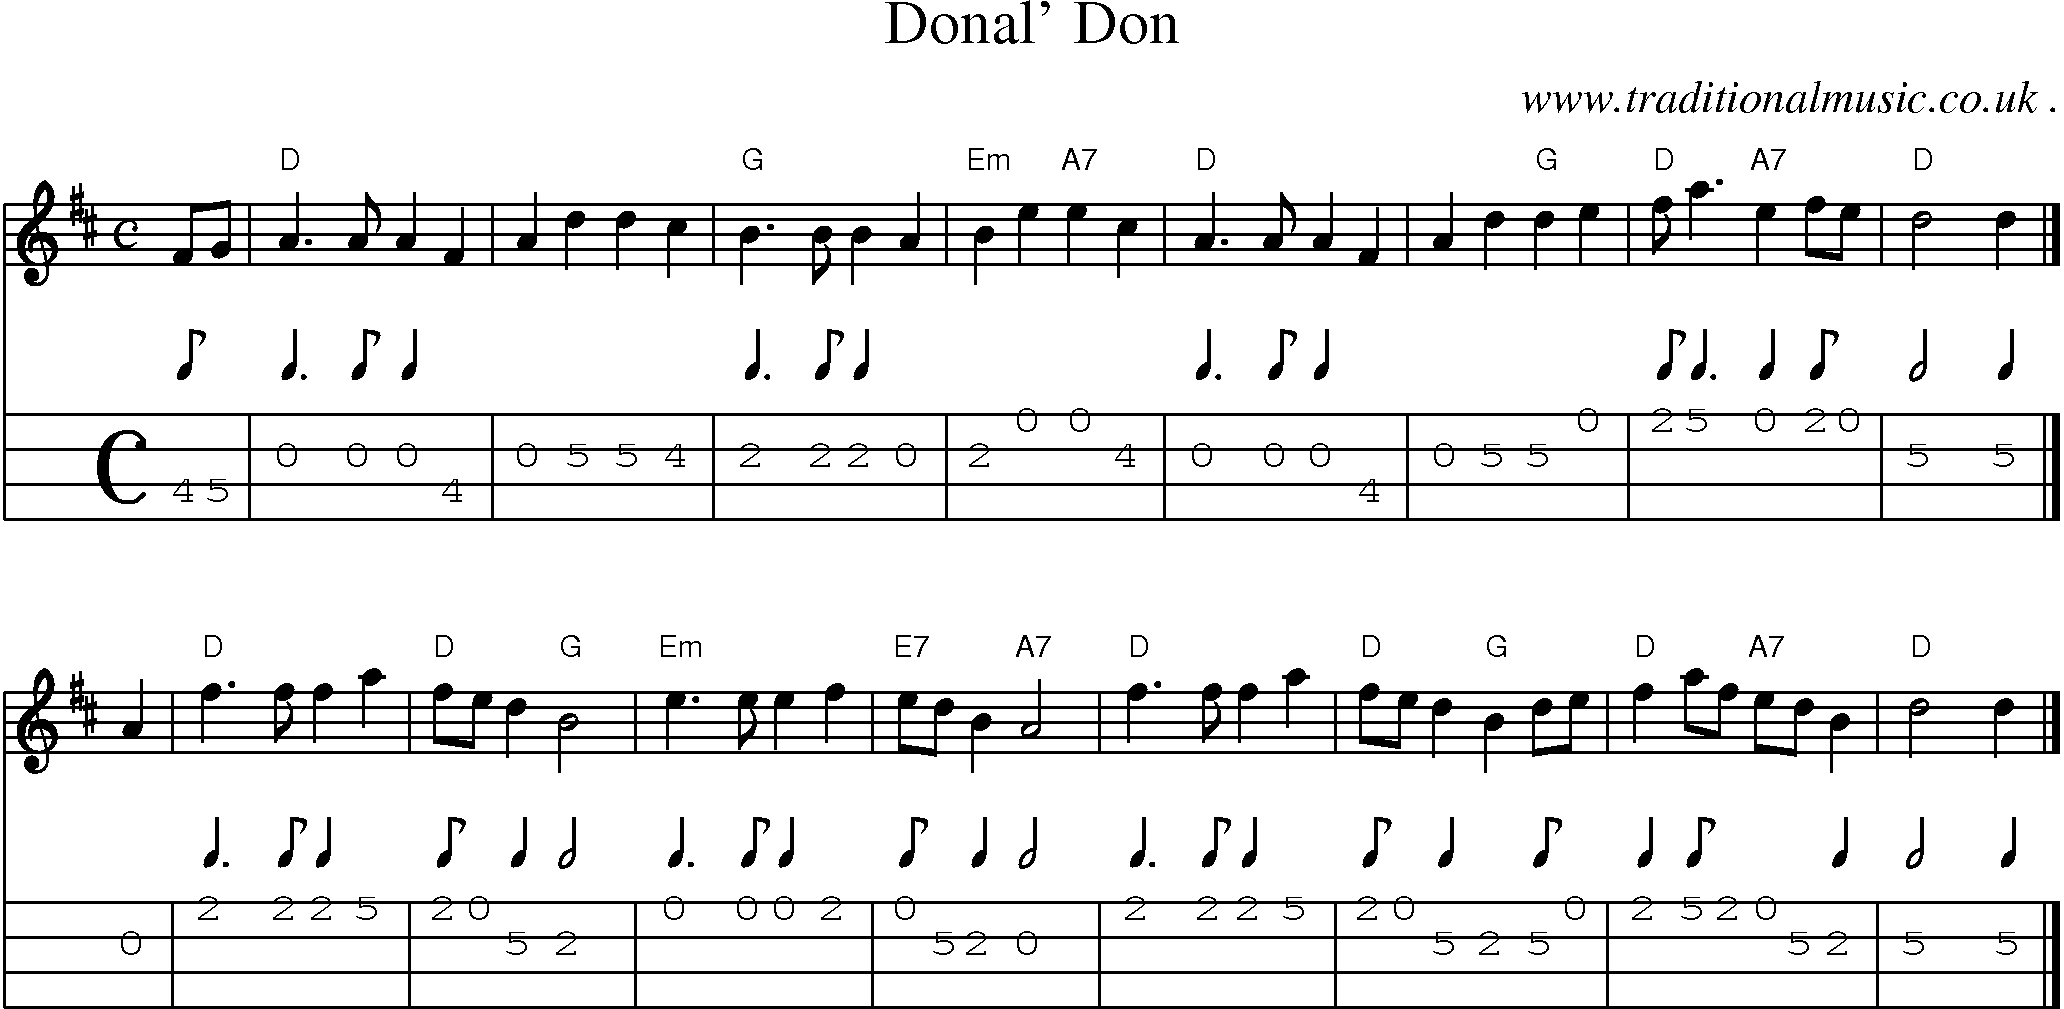 Sheet-music  score, Chords and Mandolin Tabs for Donal Don